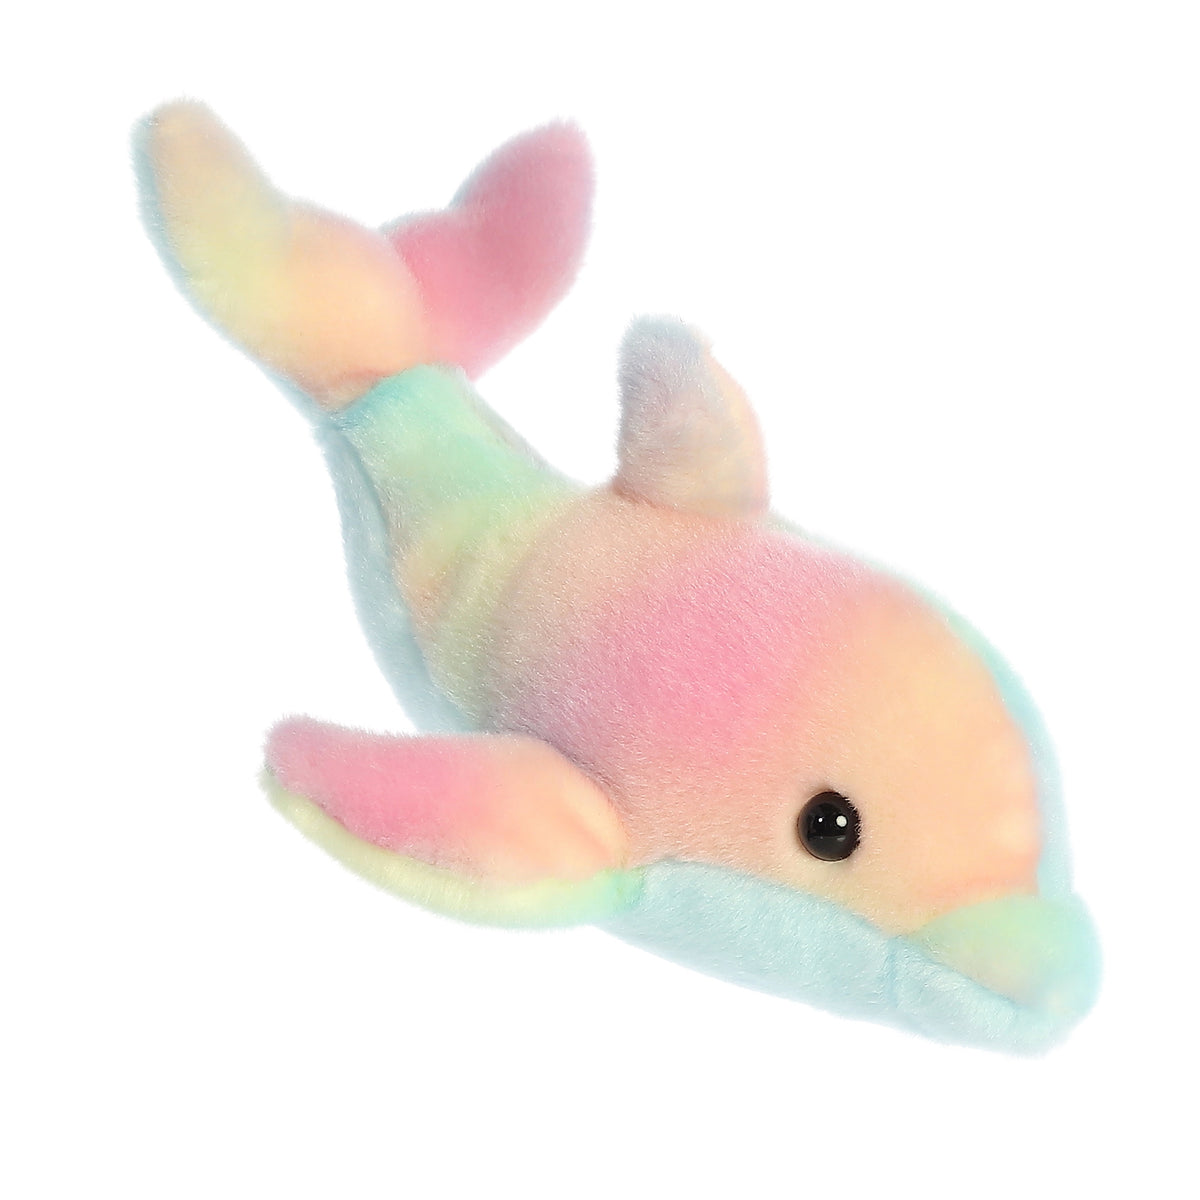 Colorful Rainbow Dolphin plush with a vibrant blue underside, inviting playful and cuddly adventures with enchanting eyes.